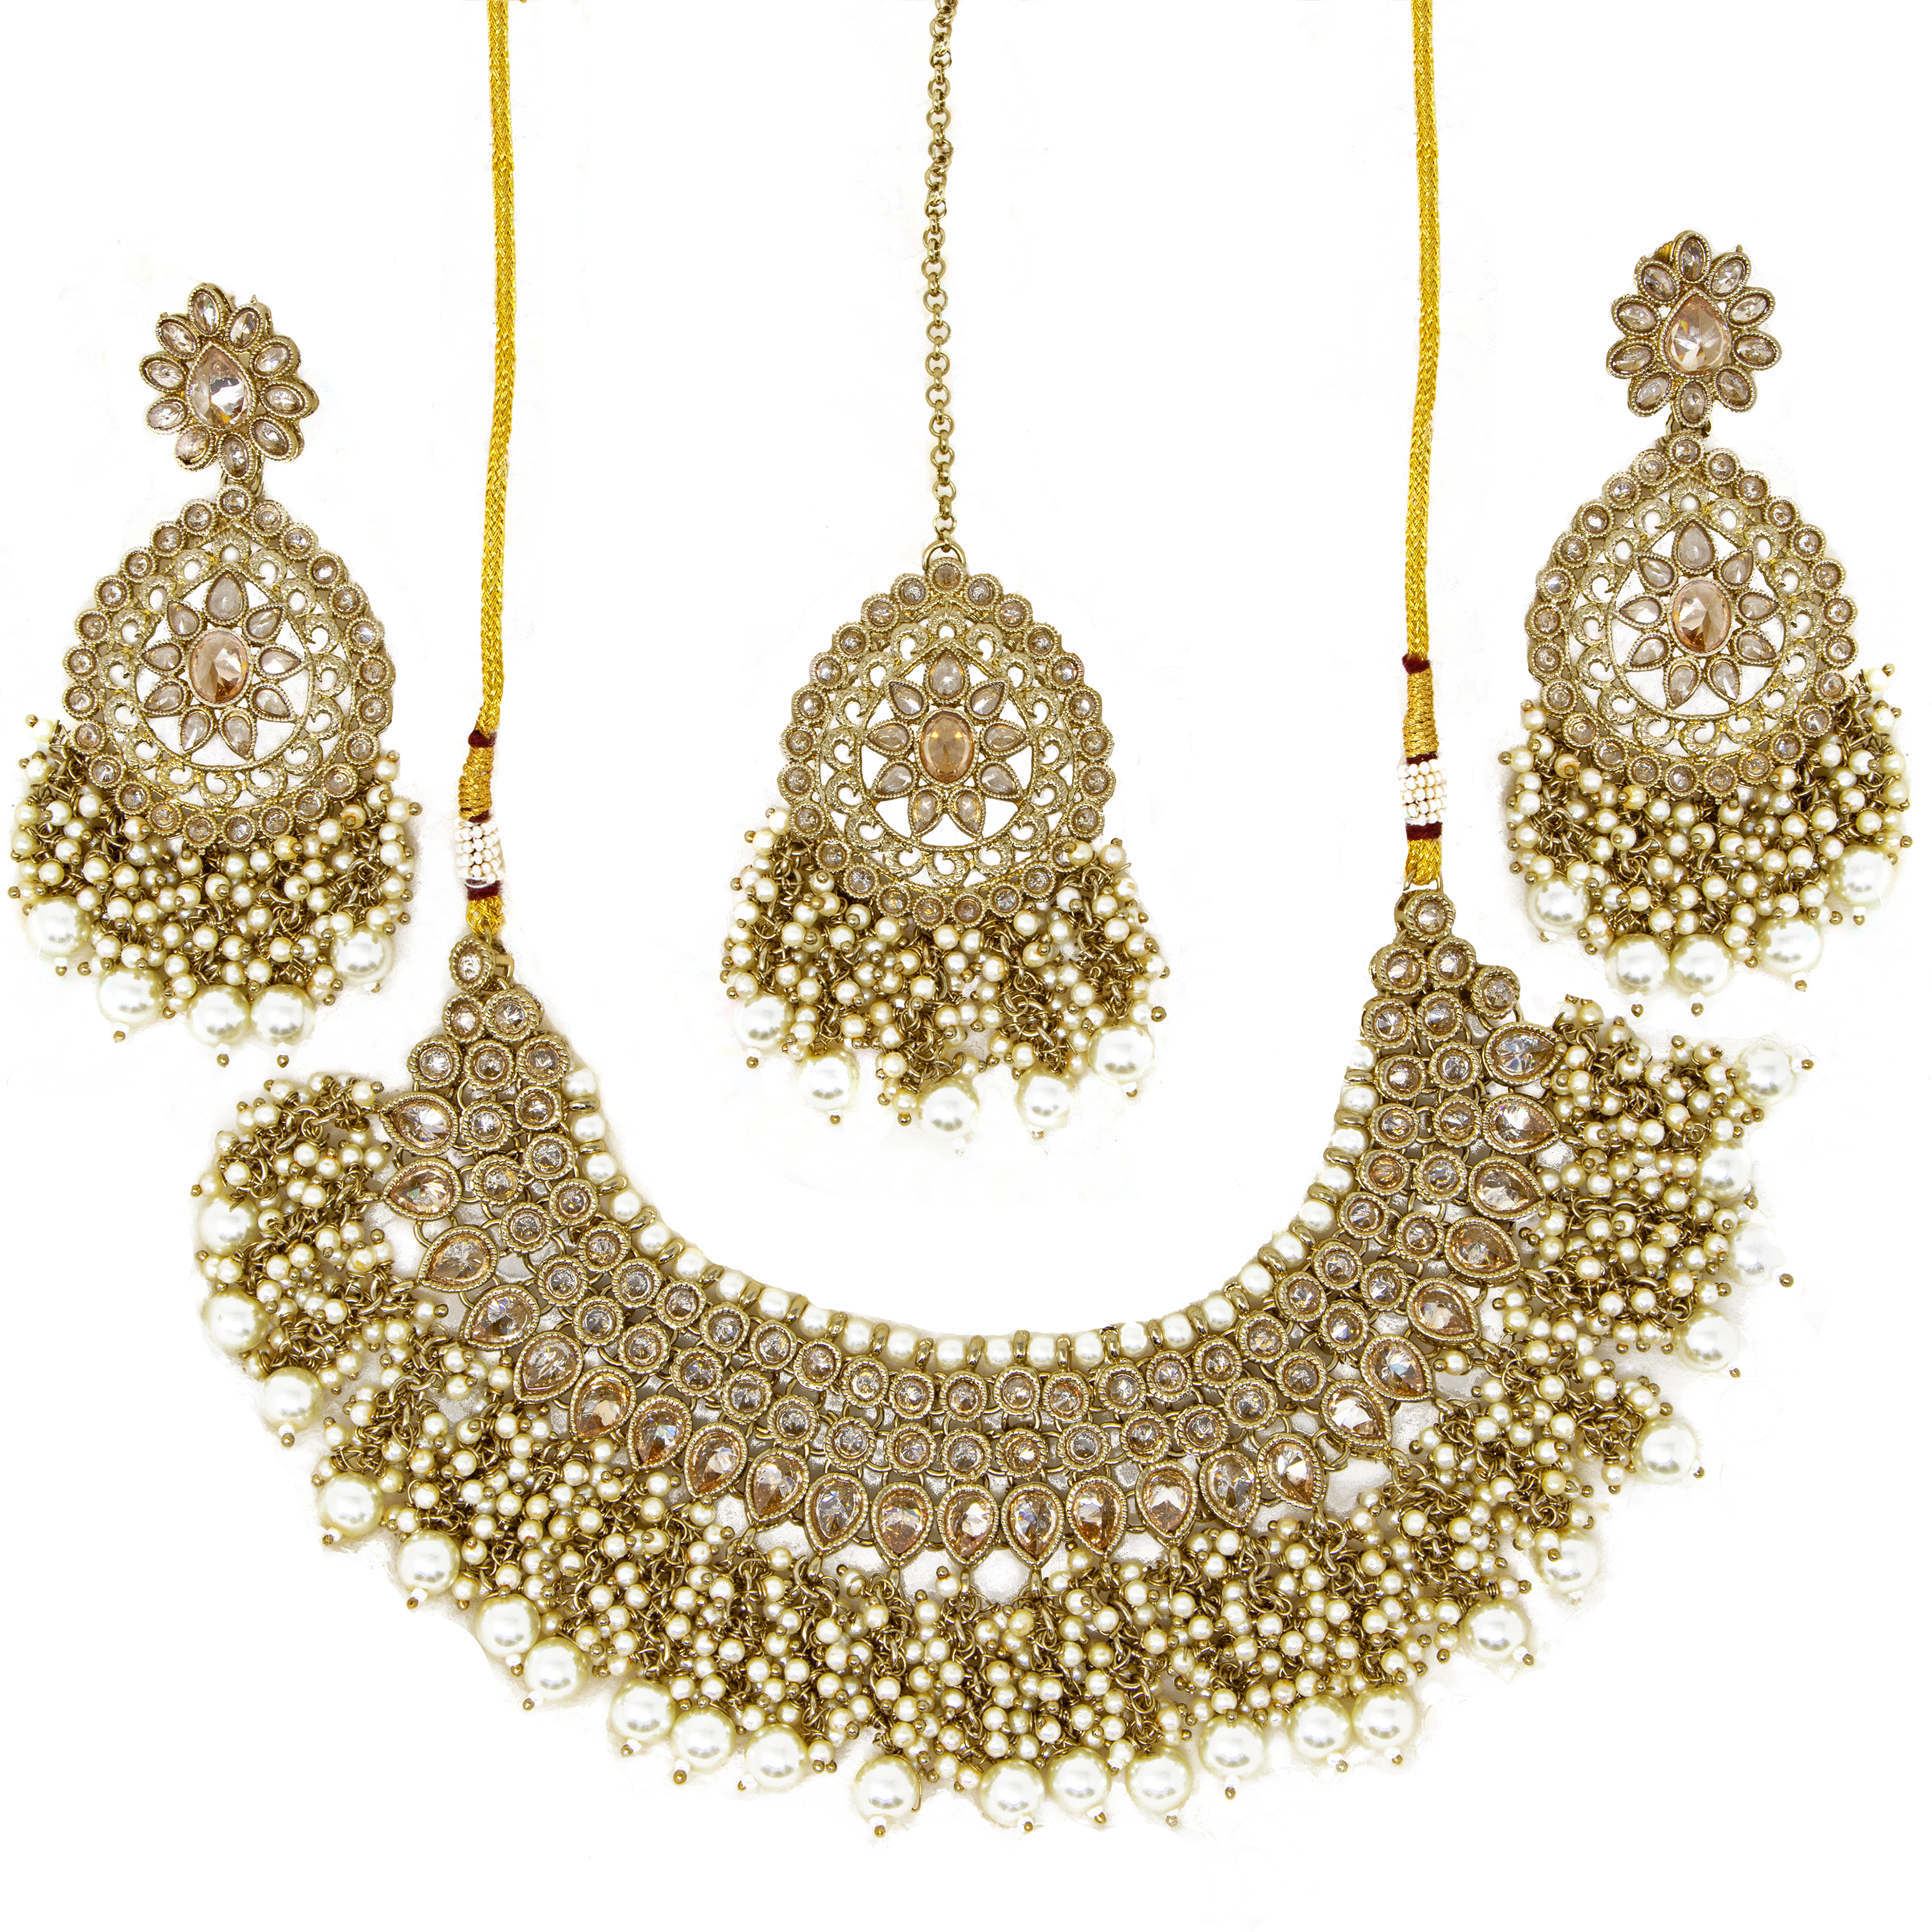 Champagne Gold 3 piece jewelry set- Necklace, earrings,& bindi with crystals, beads, and pearls